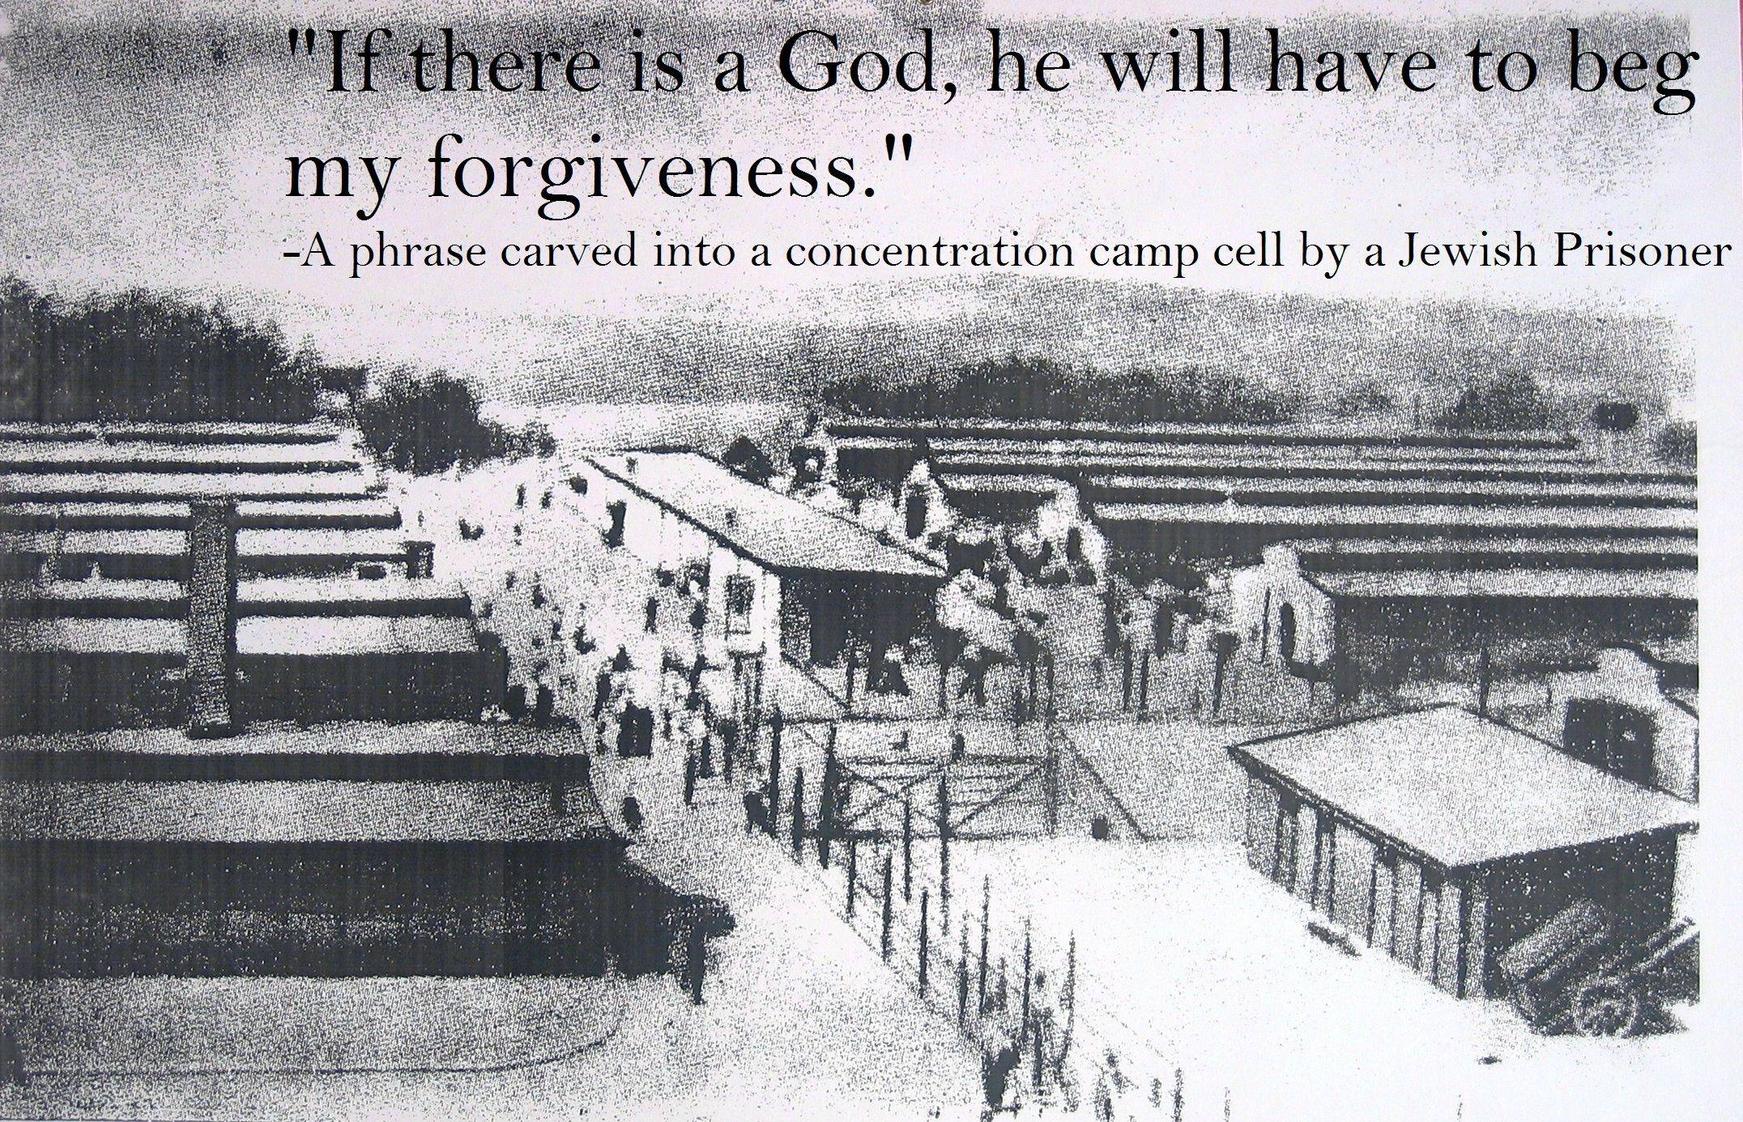 wenn es einen gott gibt muß er mich um verzeihung bitten - "If there is a God, he will have to beg my forgiveness." A phrase carved into a concentration camp cell by a Jewish Prisoner